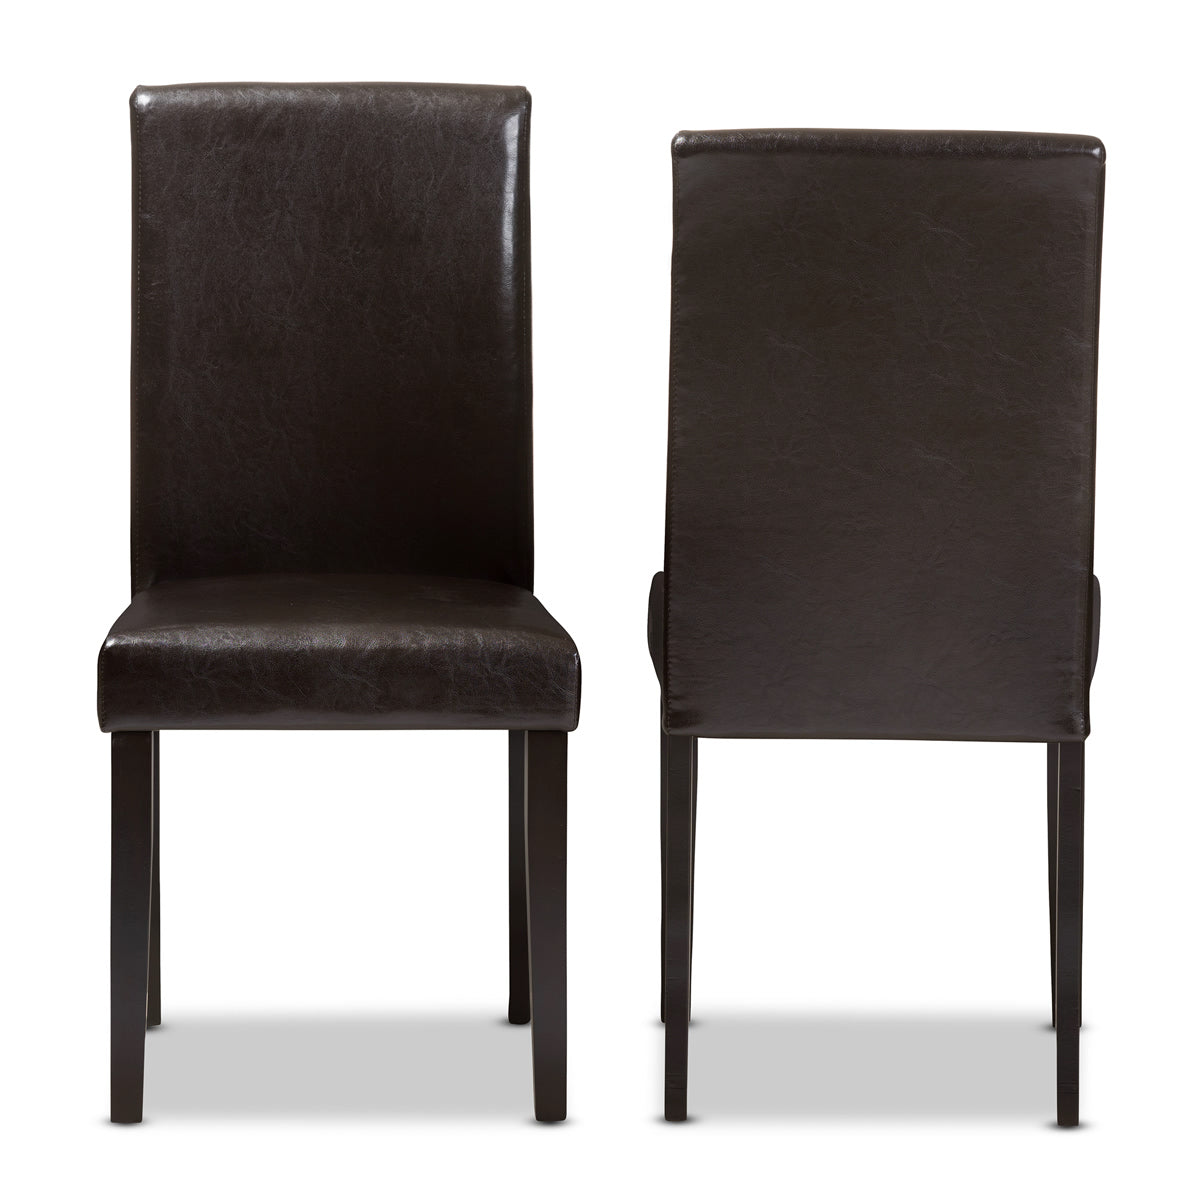 Baxton Studio Mia Modern and Contemporary Dark Brown Faux Leather Upholstered Dining Chair (Set of 2) Baxton Studio-dining chair-Minimal And Modern - 2